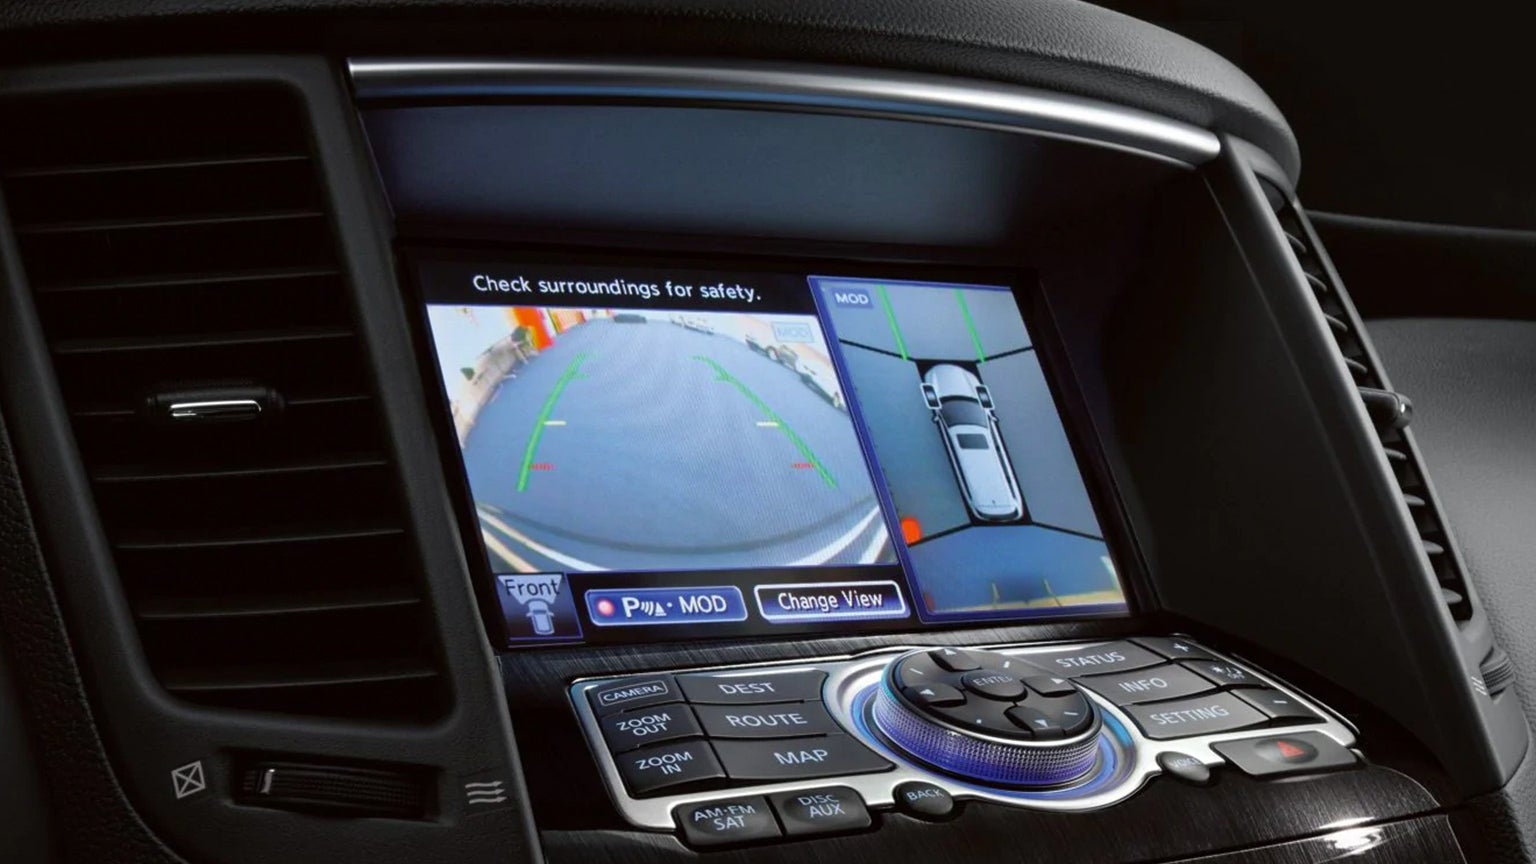 INFINITI Signature30 AROUND VIEW MONITOR WITH MOVING OBJECT DETECTION